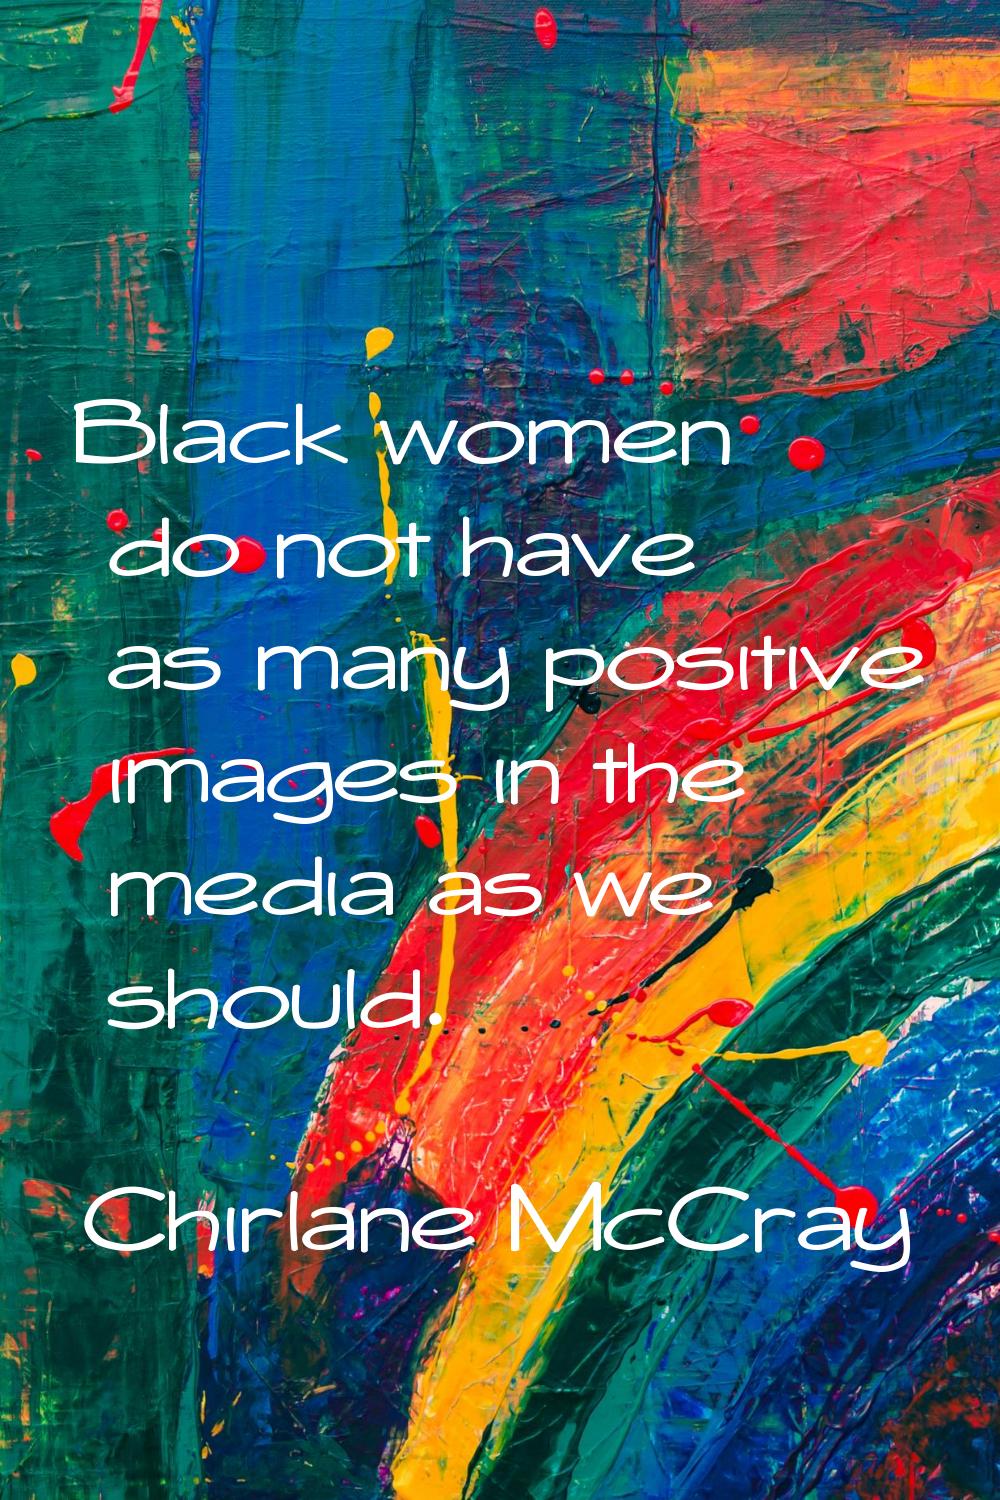 Black women do not have as many positive images in the media as we should.